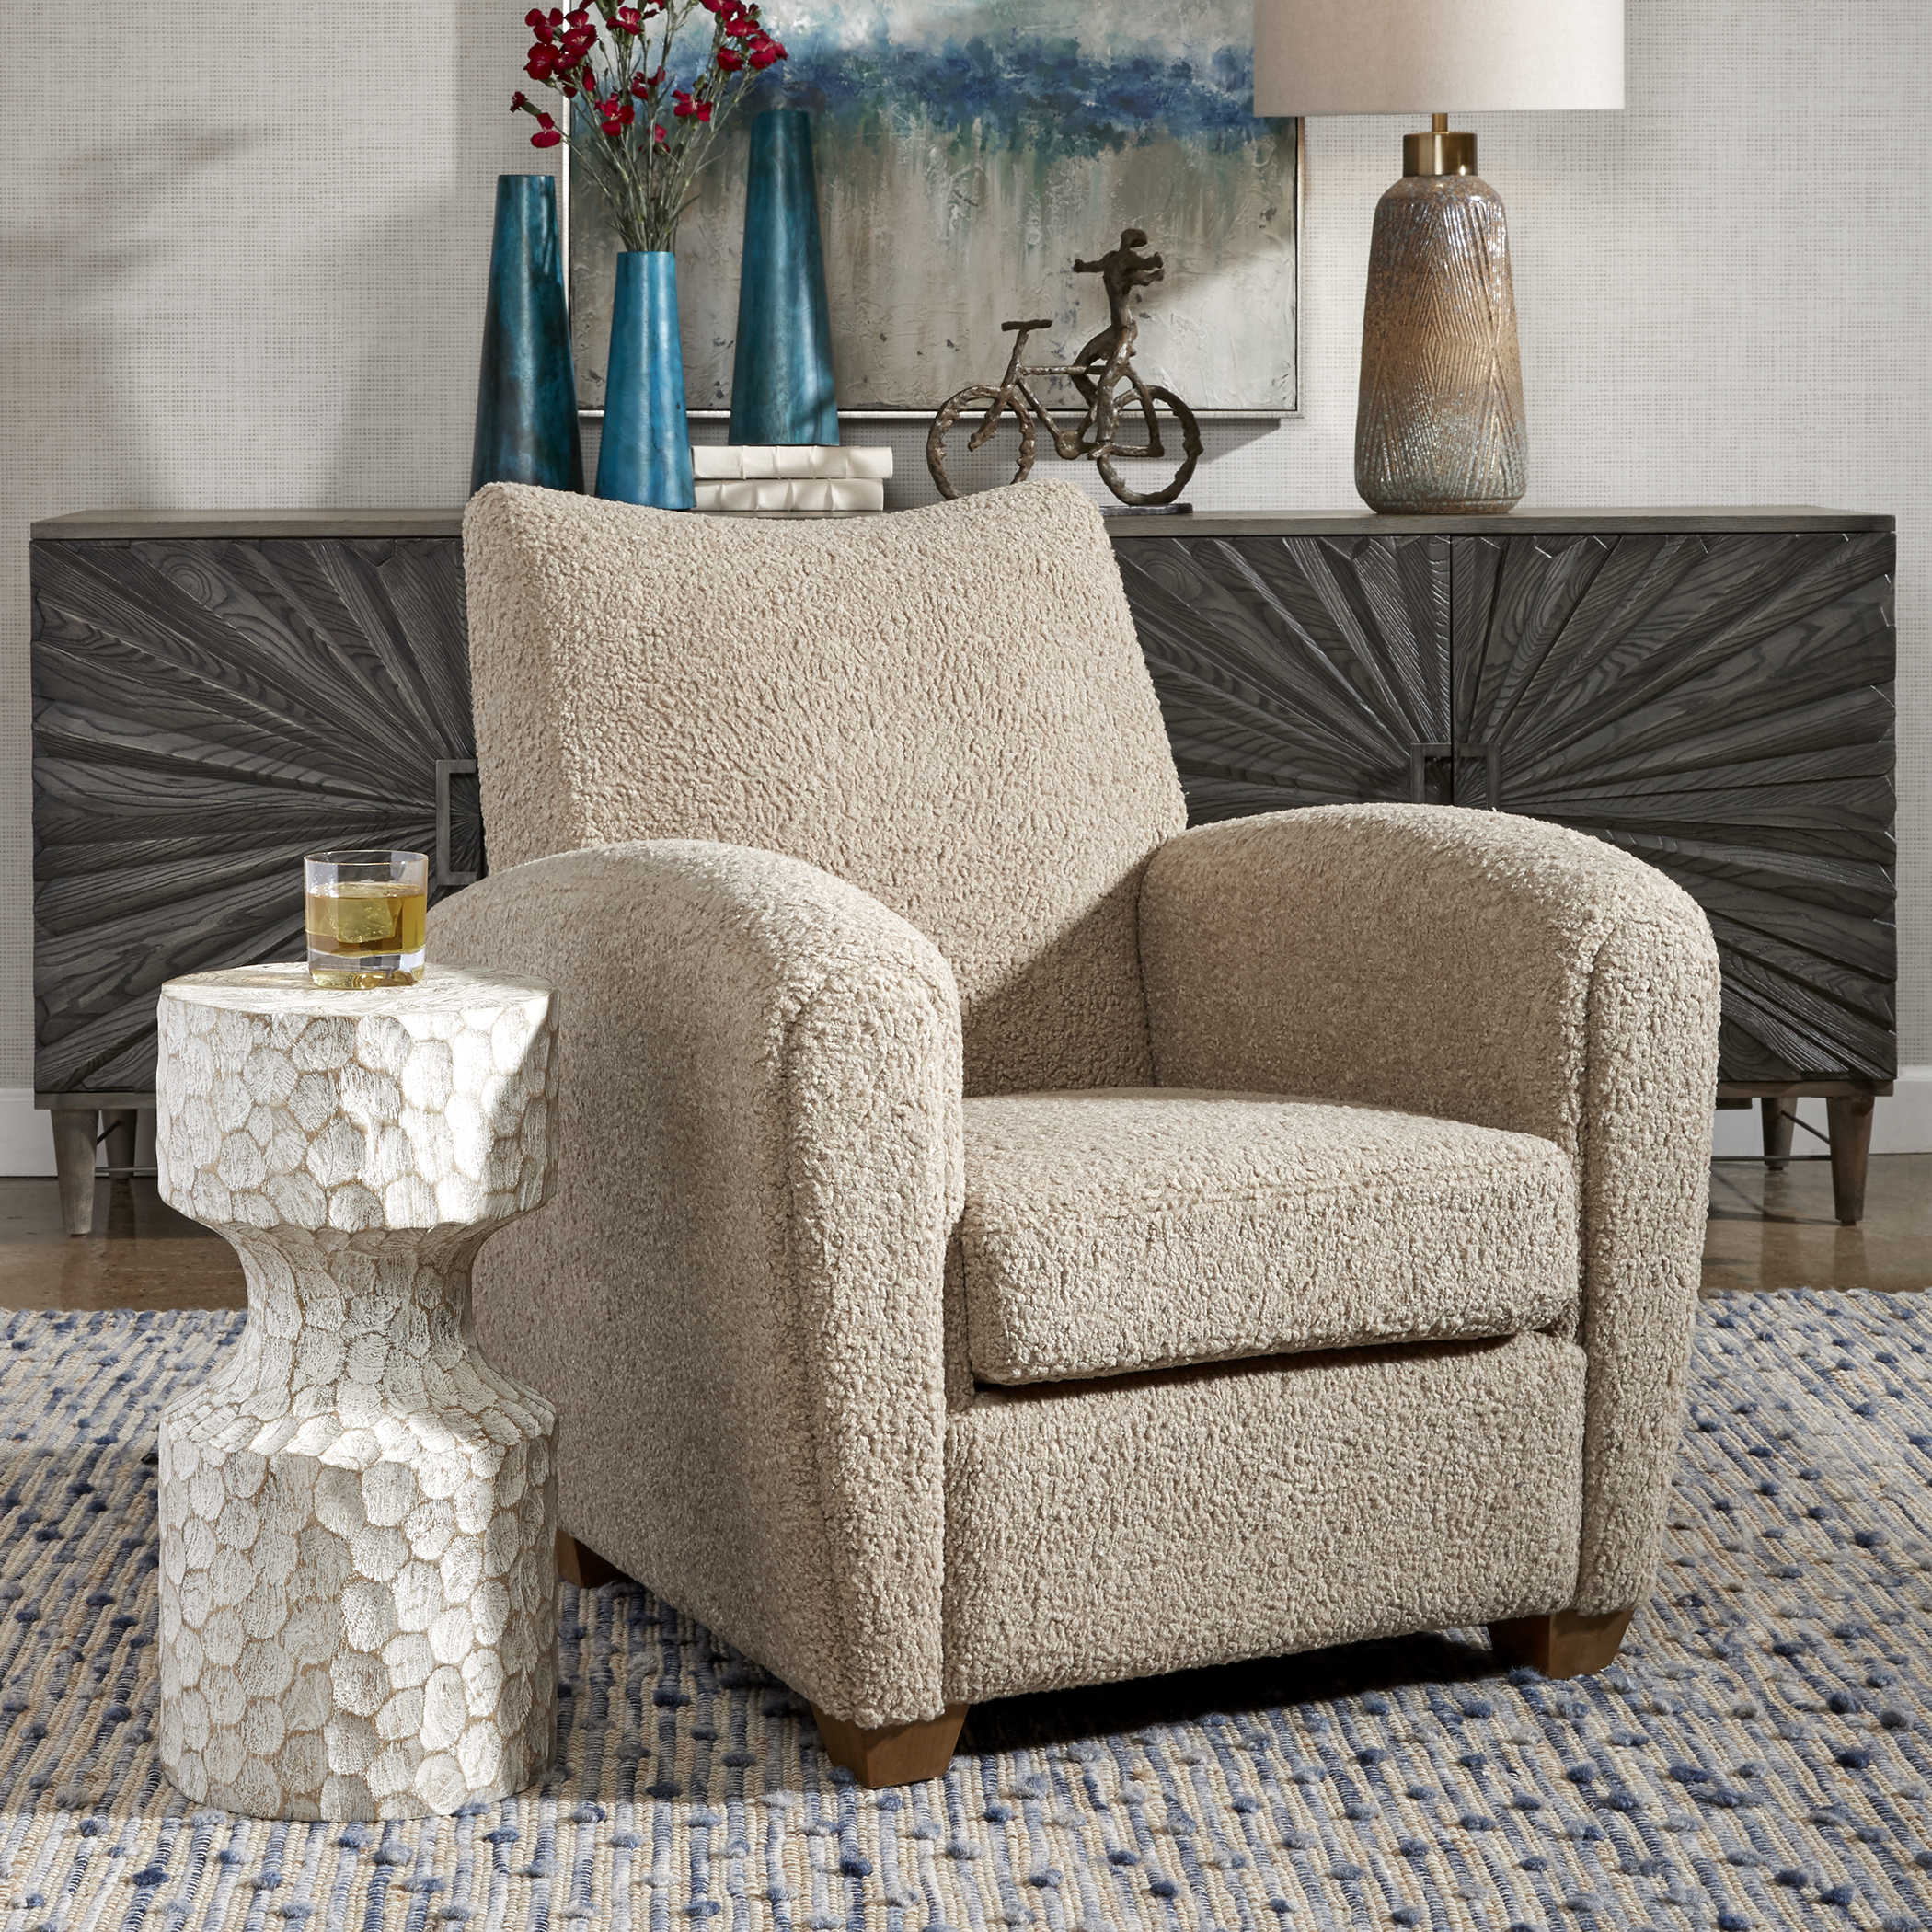 Uttermost Aegea Beige and Gray Woven Rattan Accent Chair - #95T61